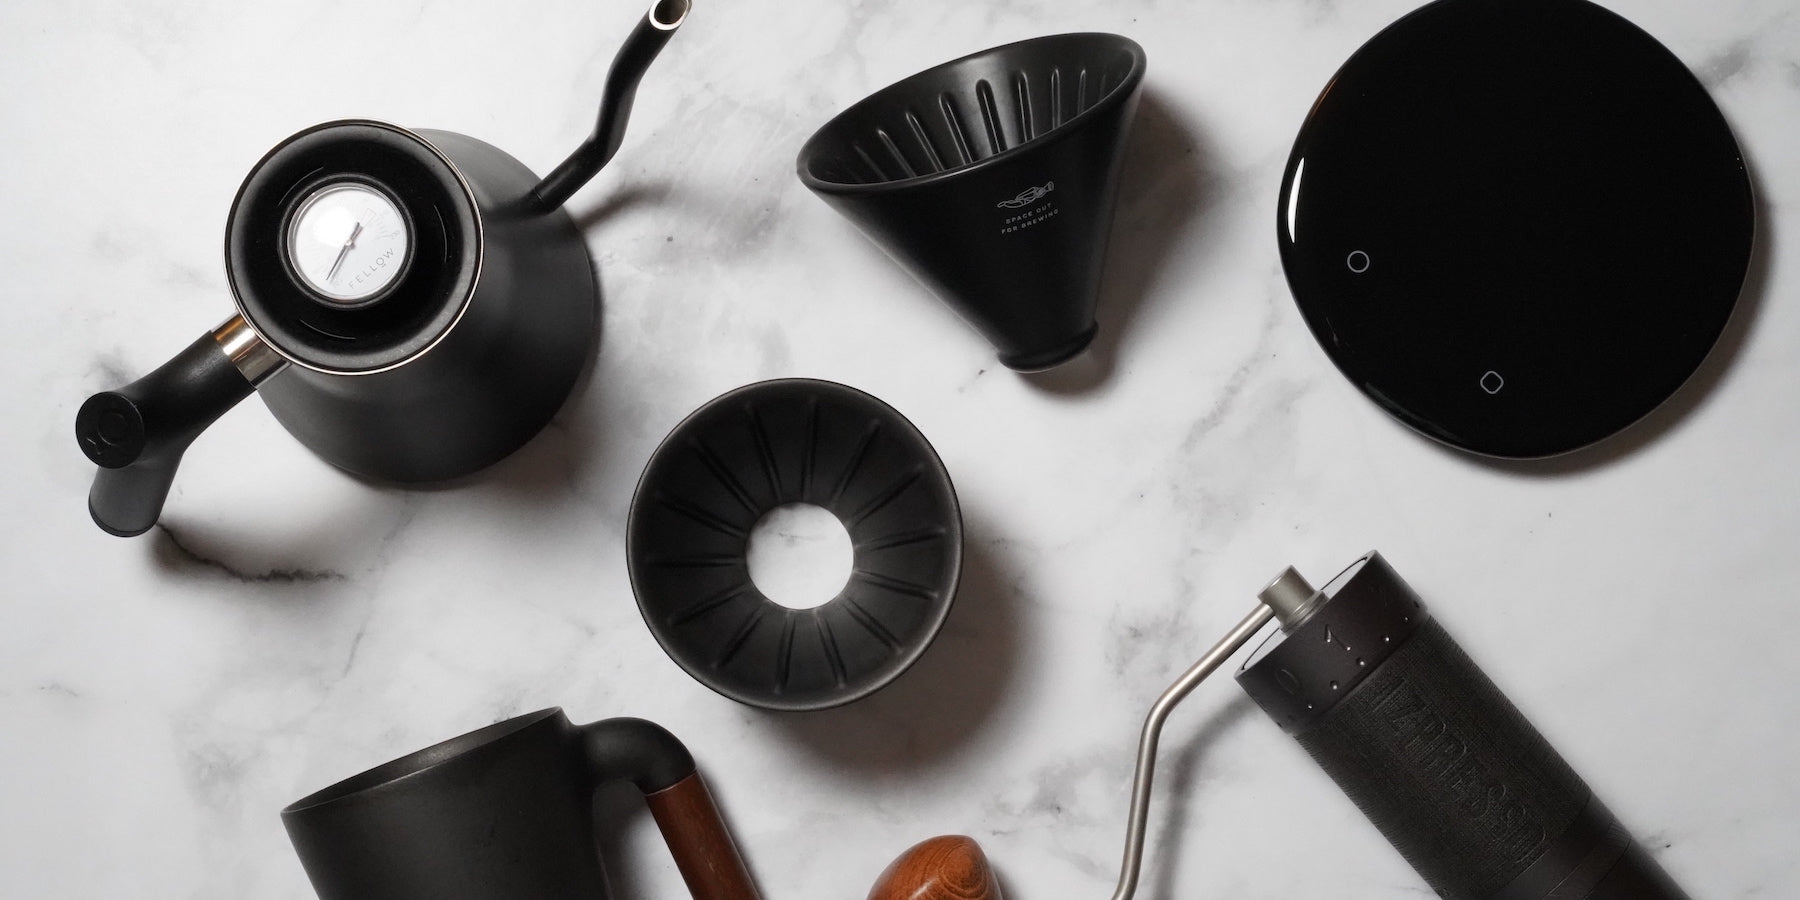 All Pour Over Speciality Coffee Products | THE COFFEE GOODS